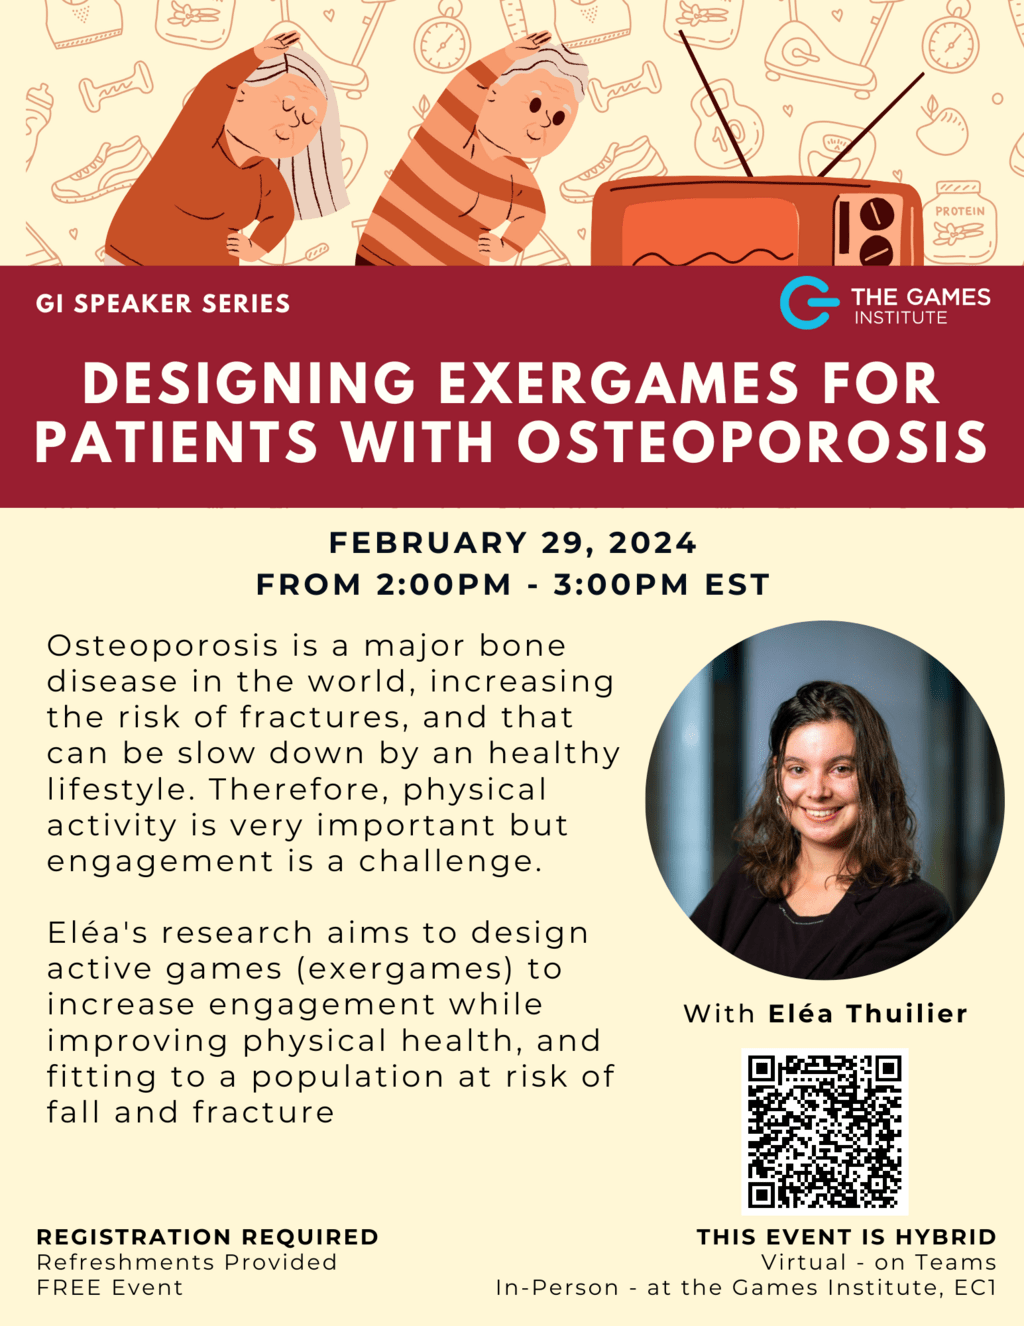 Poster of the "Designing Exergames for Patients with Osteoporosis" Event